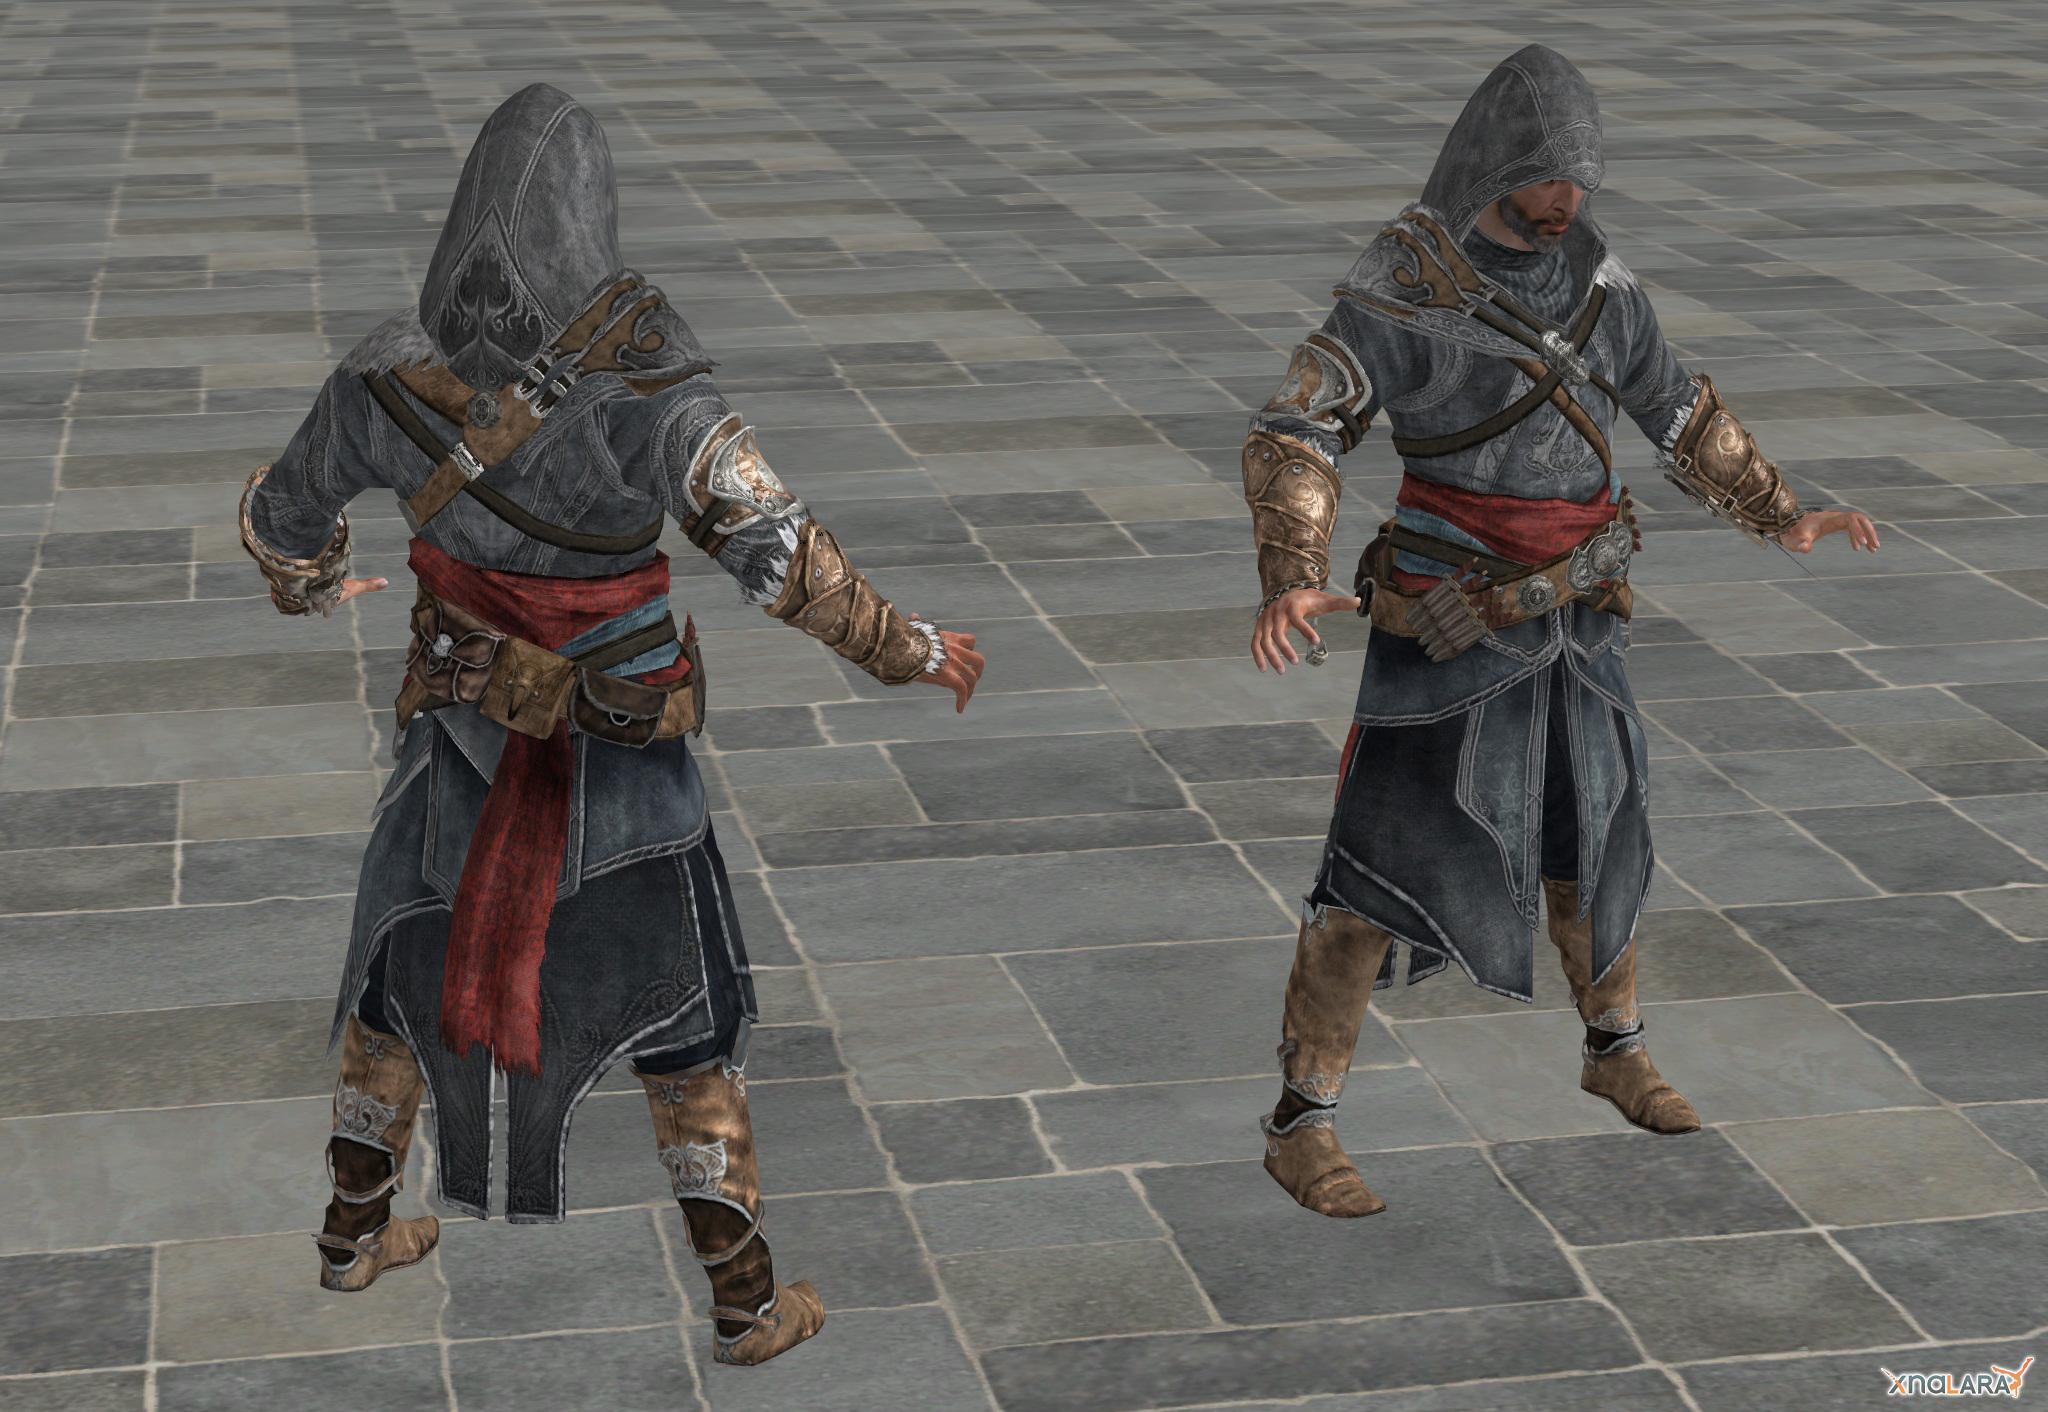 Assassin's Creed: Revelations outfits